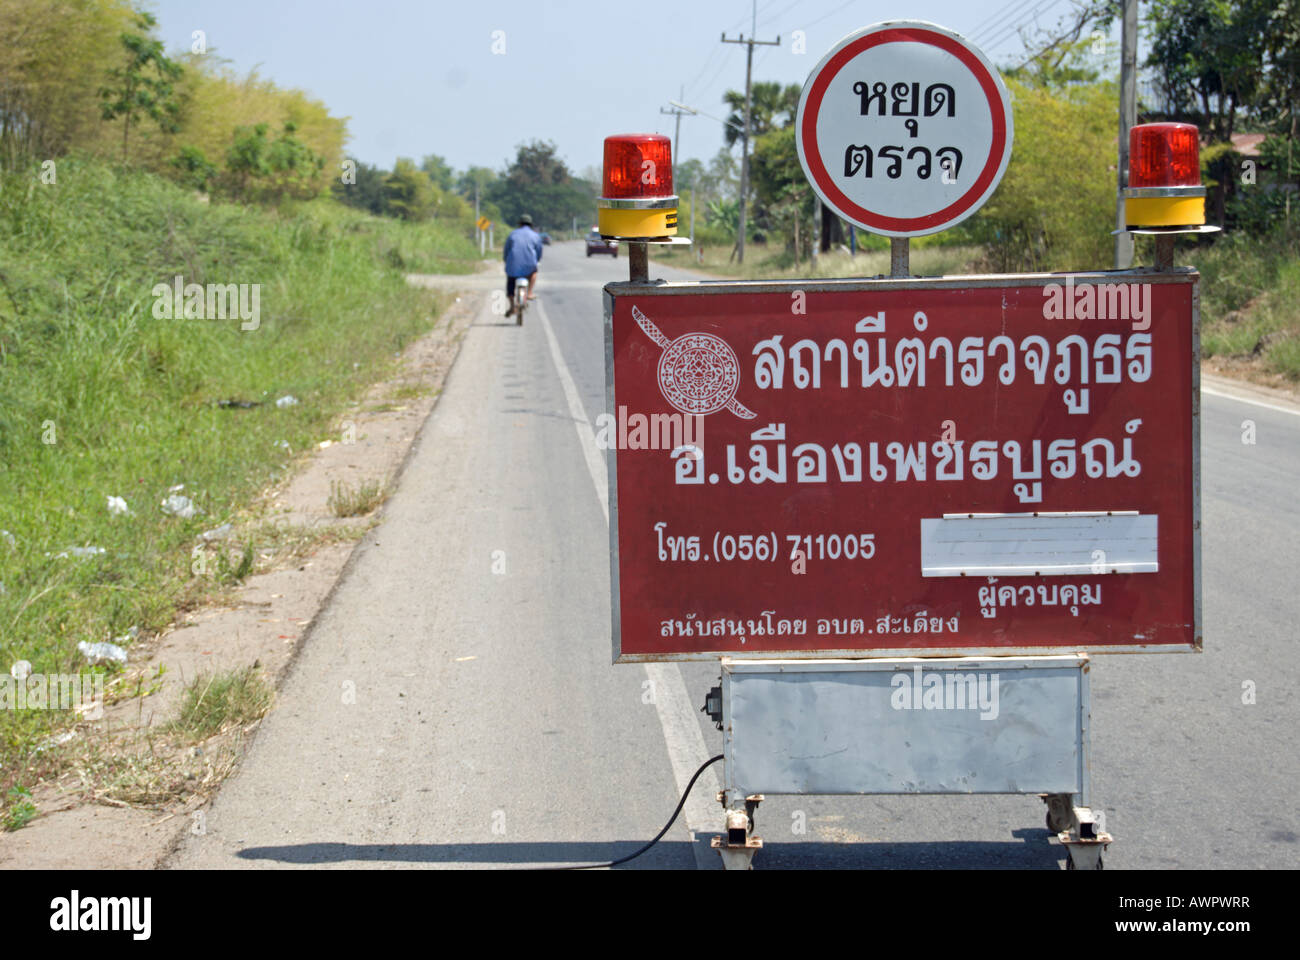 road sign near phetchabun, thailand, advising road users of a police checkpoint Stock Photo